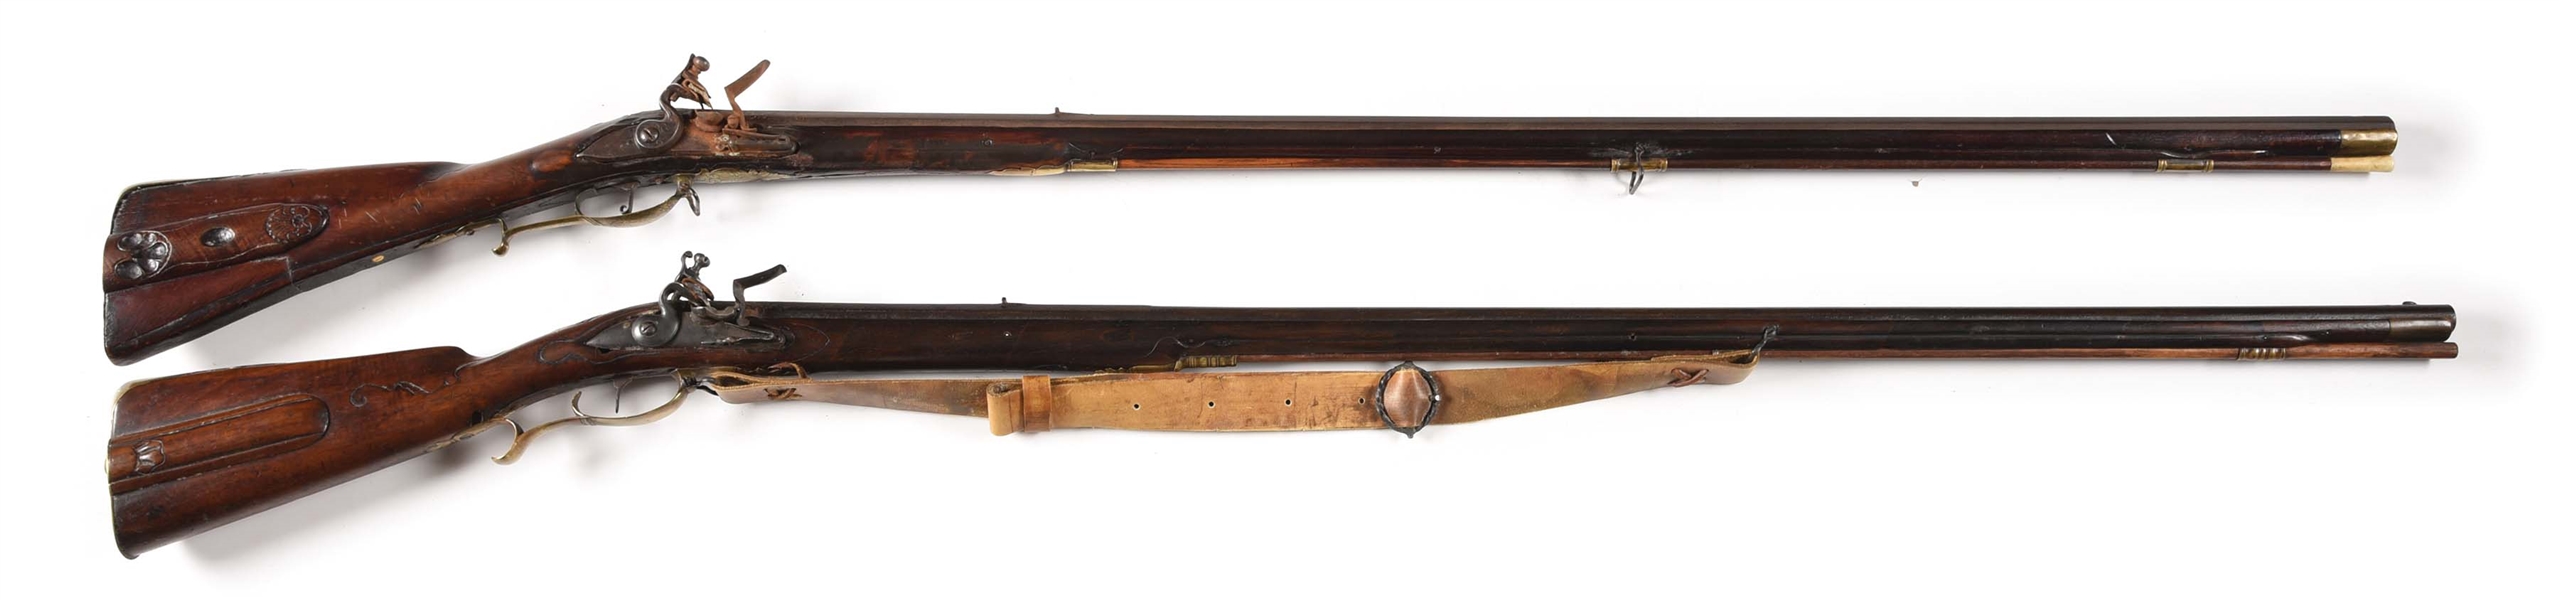 (A) LOT OF 2: FLINTLOCK RIFLE WITH BARREL MARKED ANDREAS ALBRECHT AND GERMANIC RIFLE.